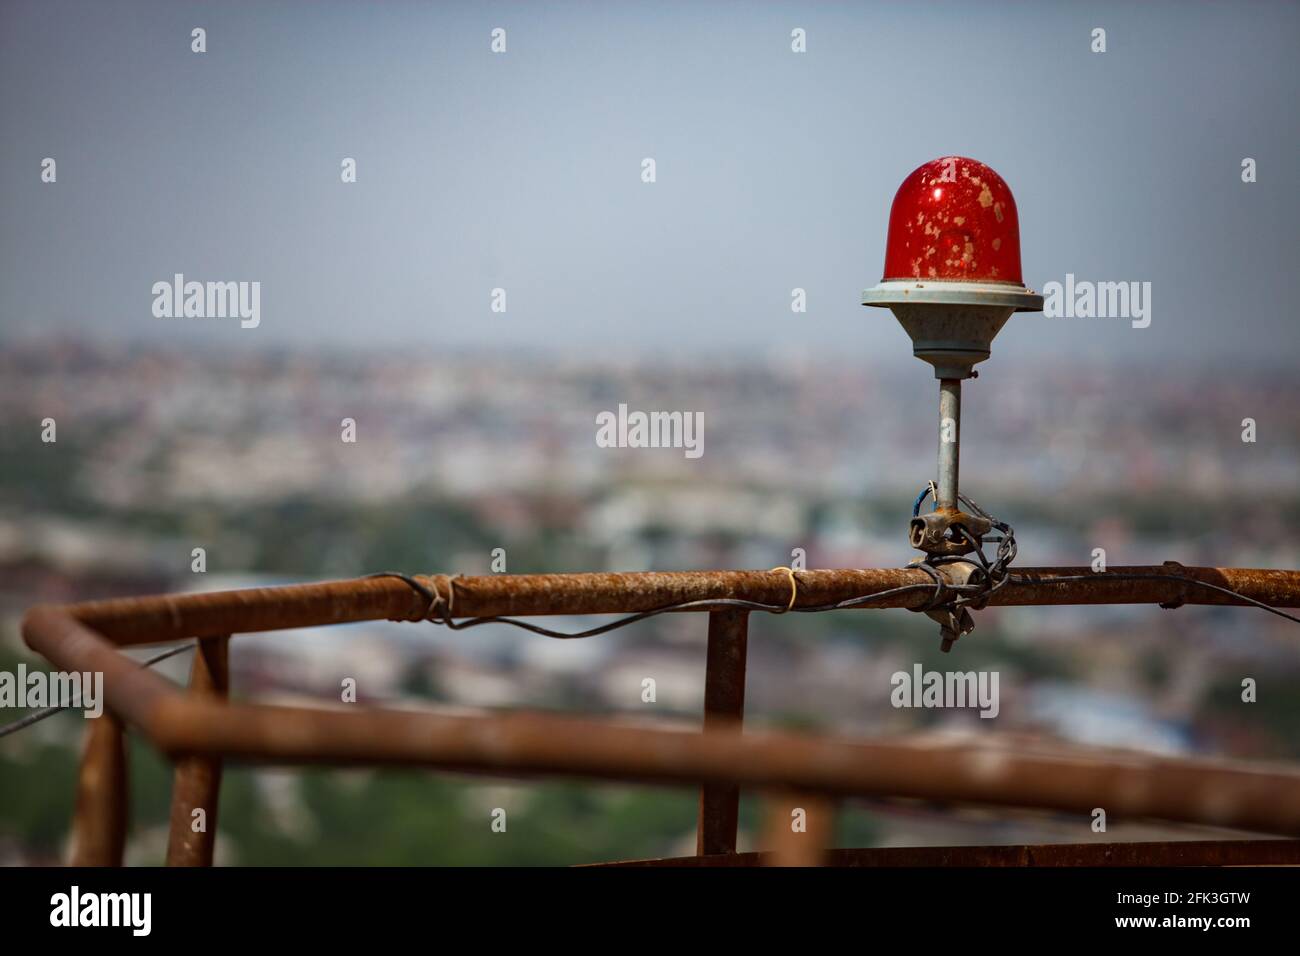 Aircrafts and airplanes warning red light signal lamp on building's roof. Stock Photo